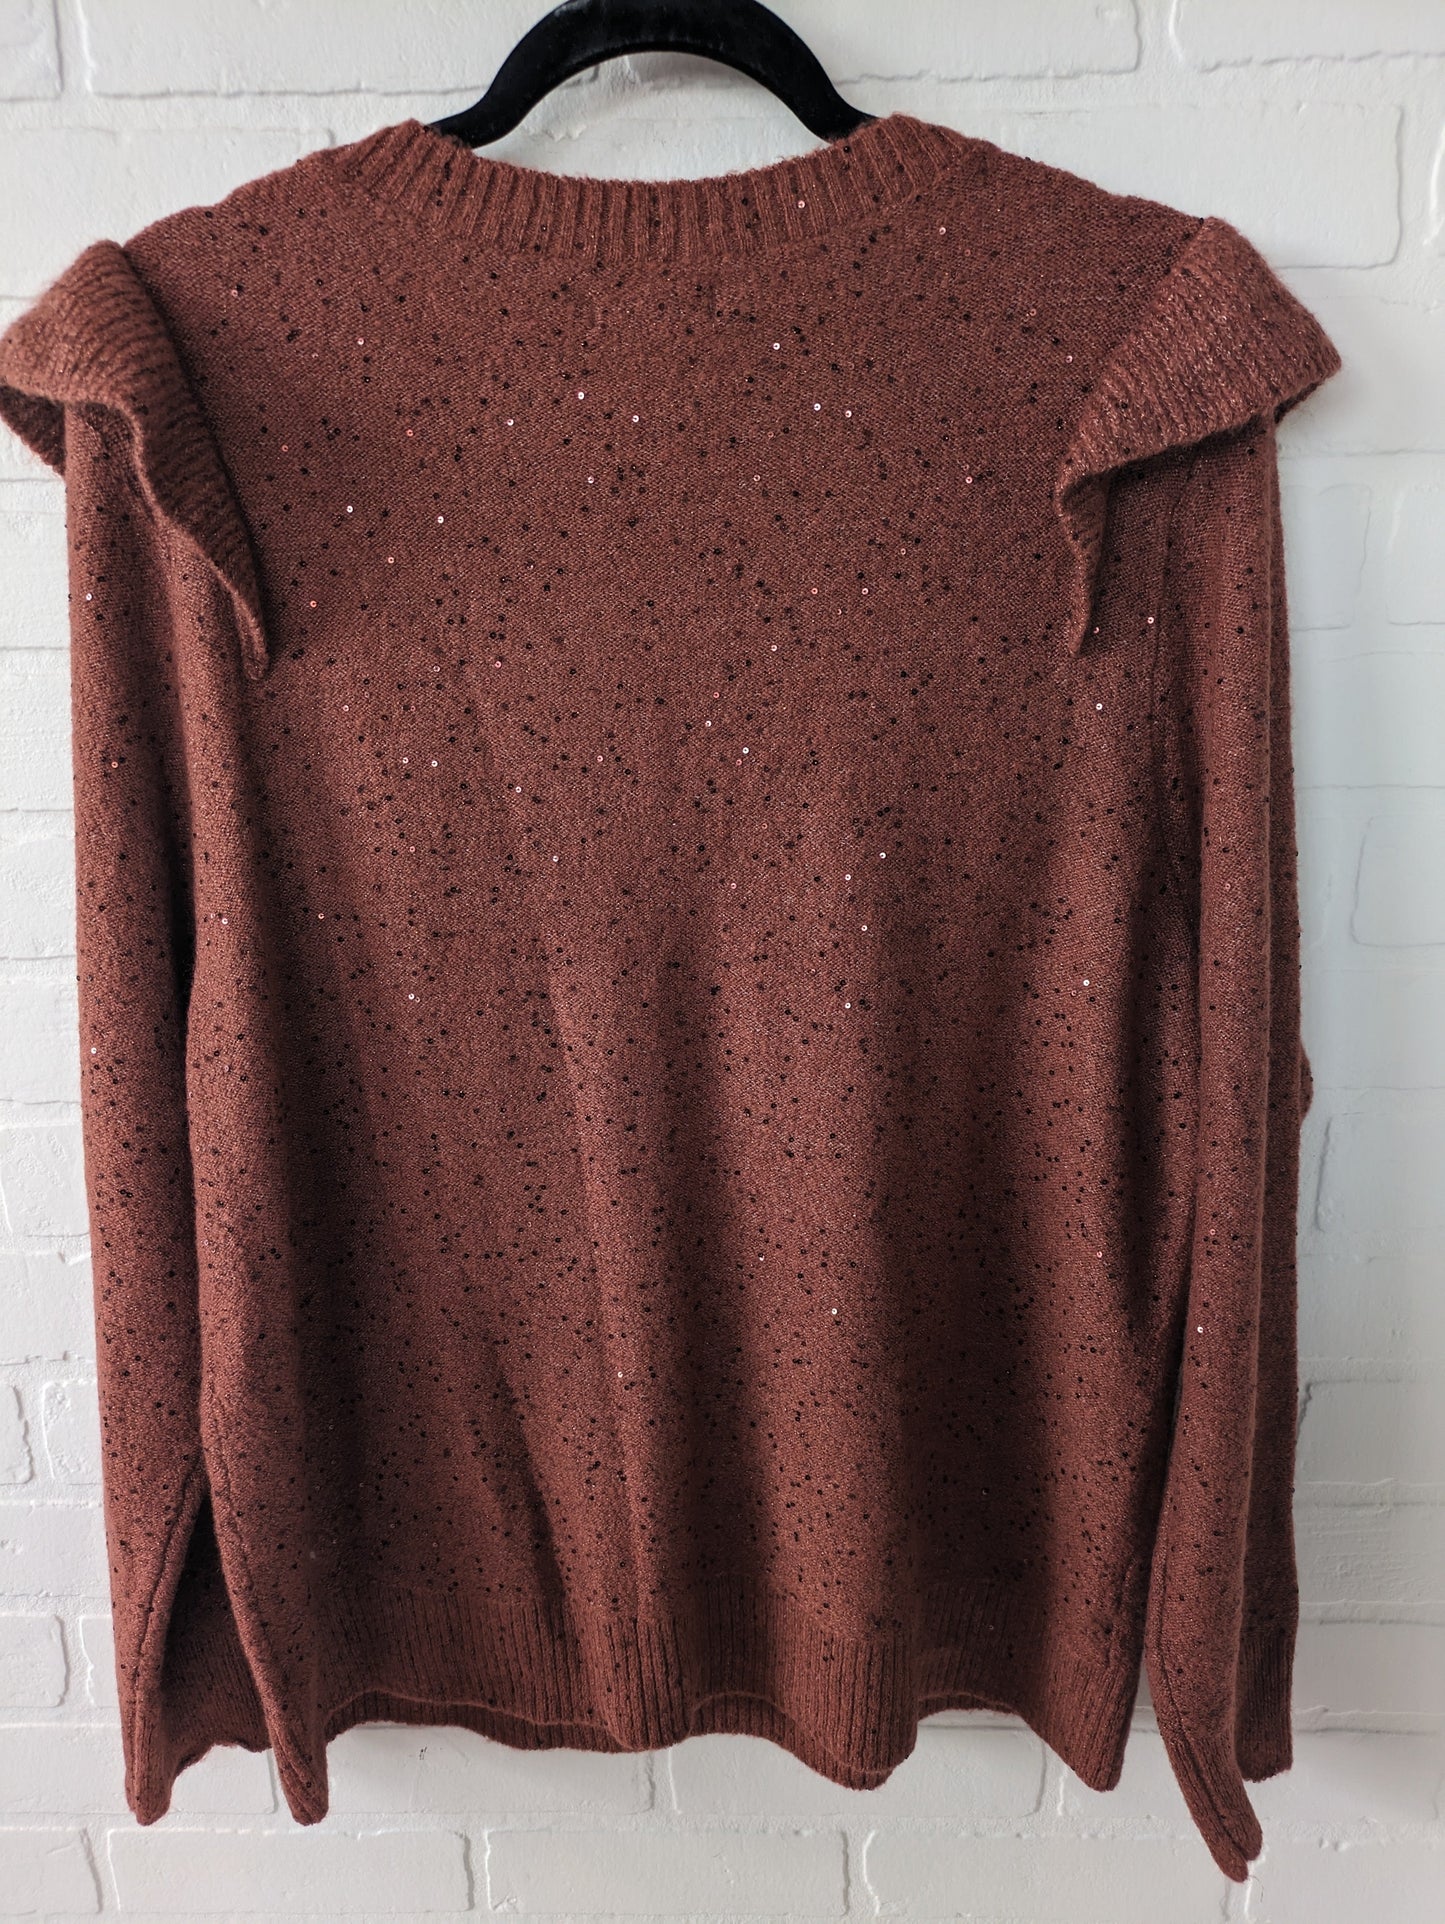 Sweater By Lc Lauren Conrad  Size: 1x